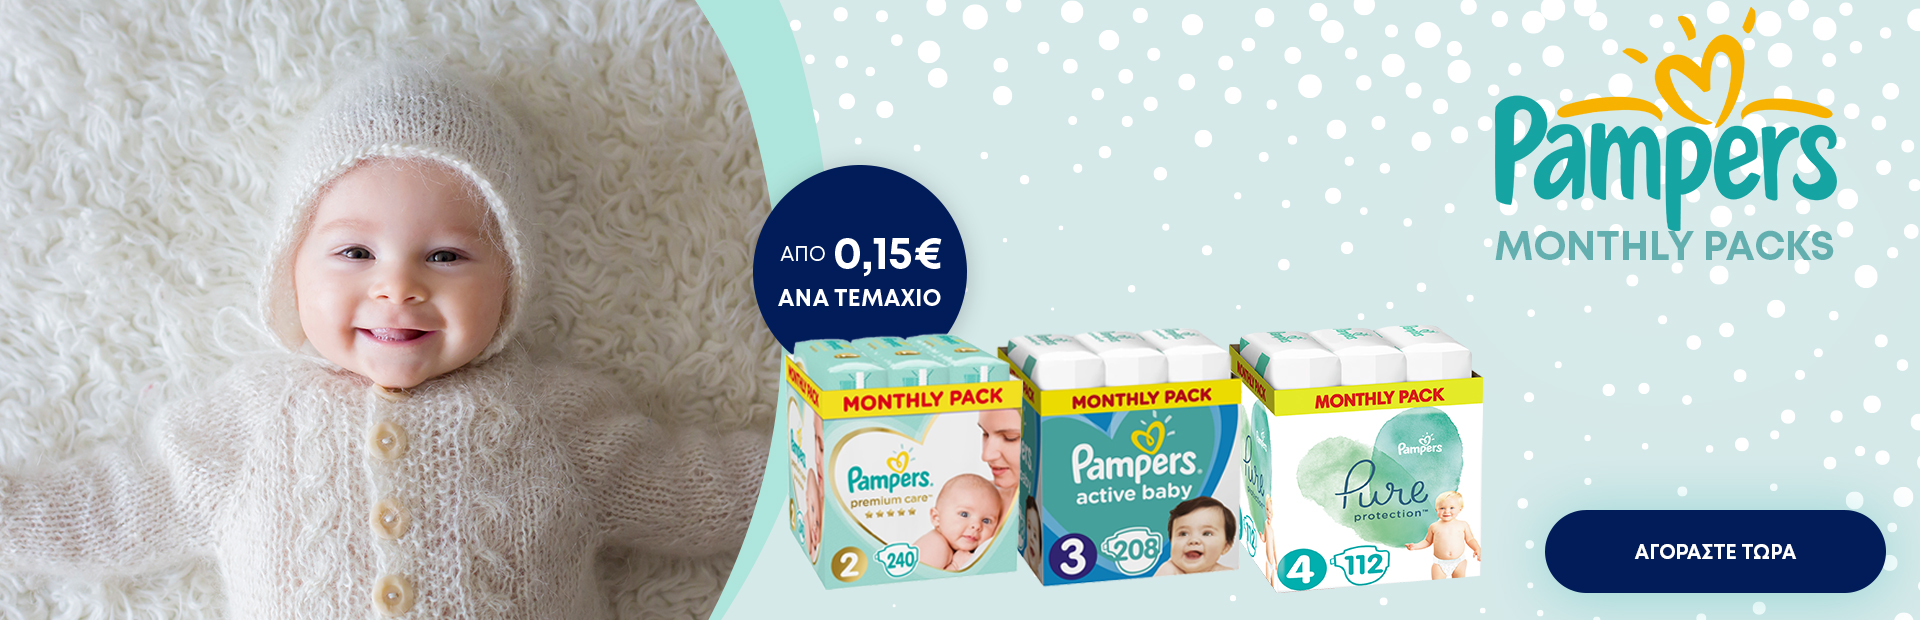 Pampers monthly yearly